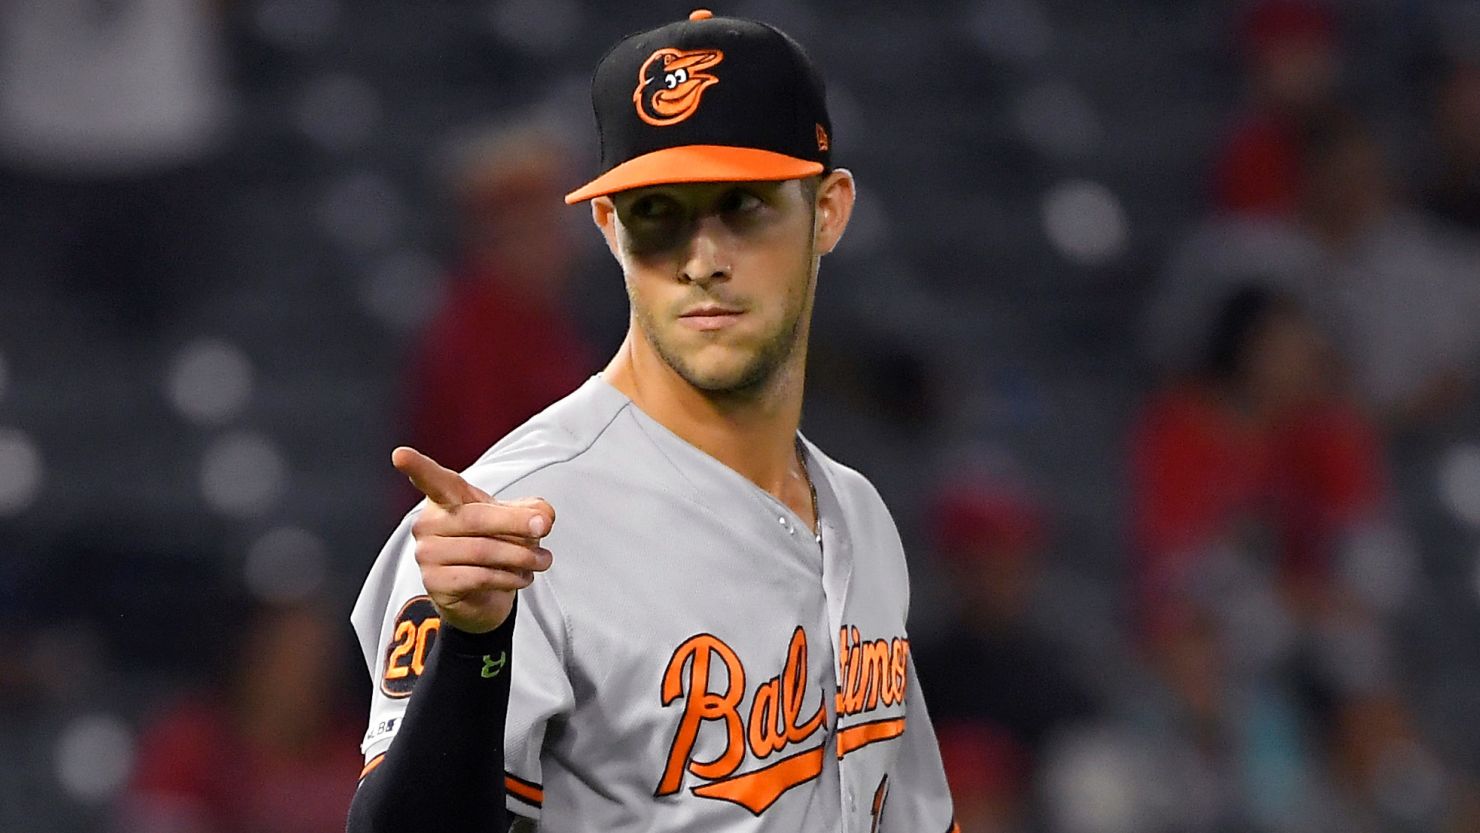 Stevie Wilkerson, who started in the outfield for the Orioles on Thursday, earned the save after Baltimore defeated the Los Angeles Angels 10-8 in 16 innings.